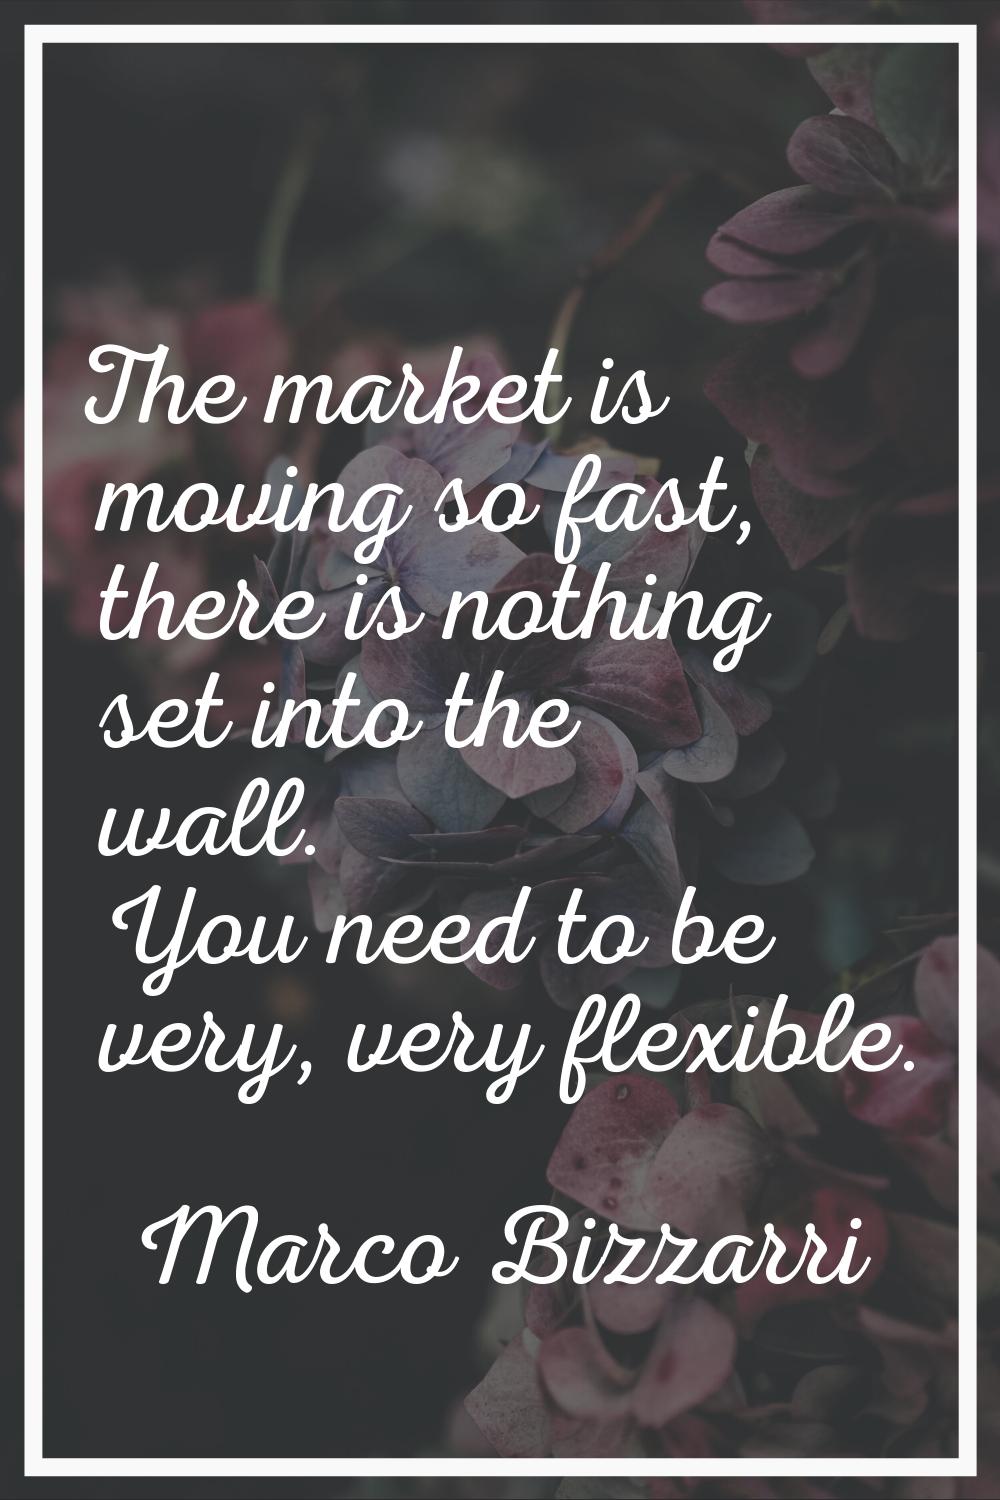 The market is moving so fast, there is nothing set into the wall. You need to be very, very flexibl